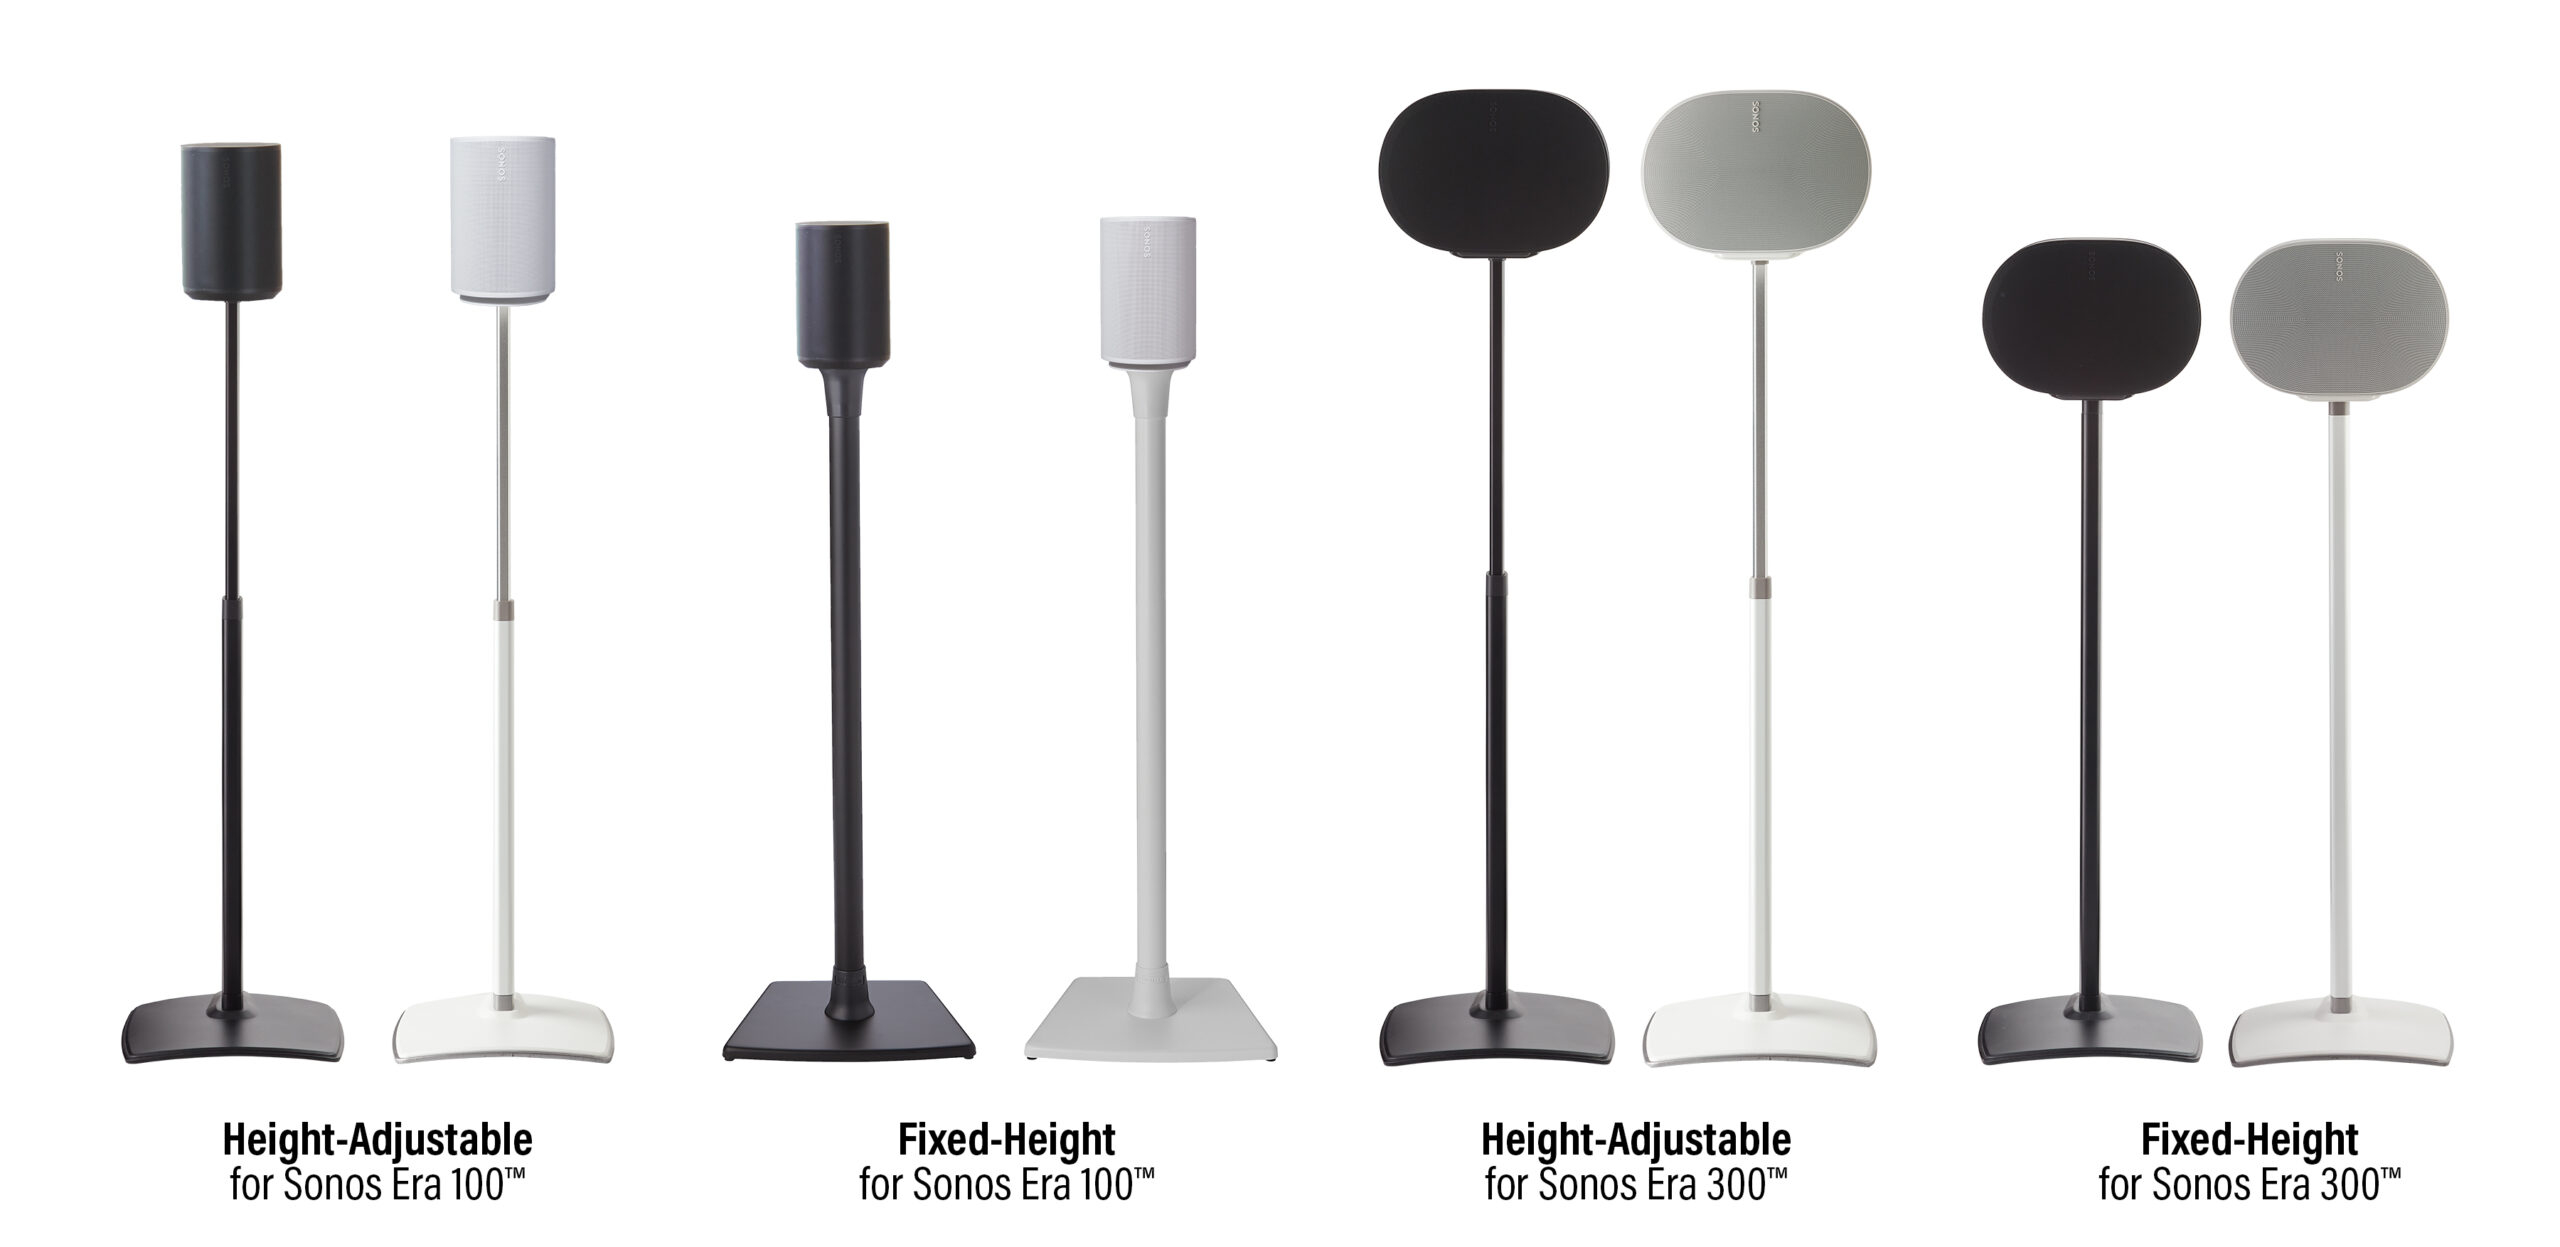 SANUS Launches Speaker Stands and Wall Mounts for the New Sonos